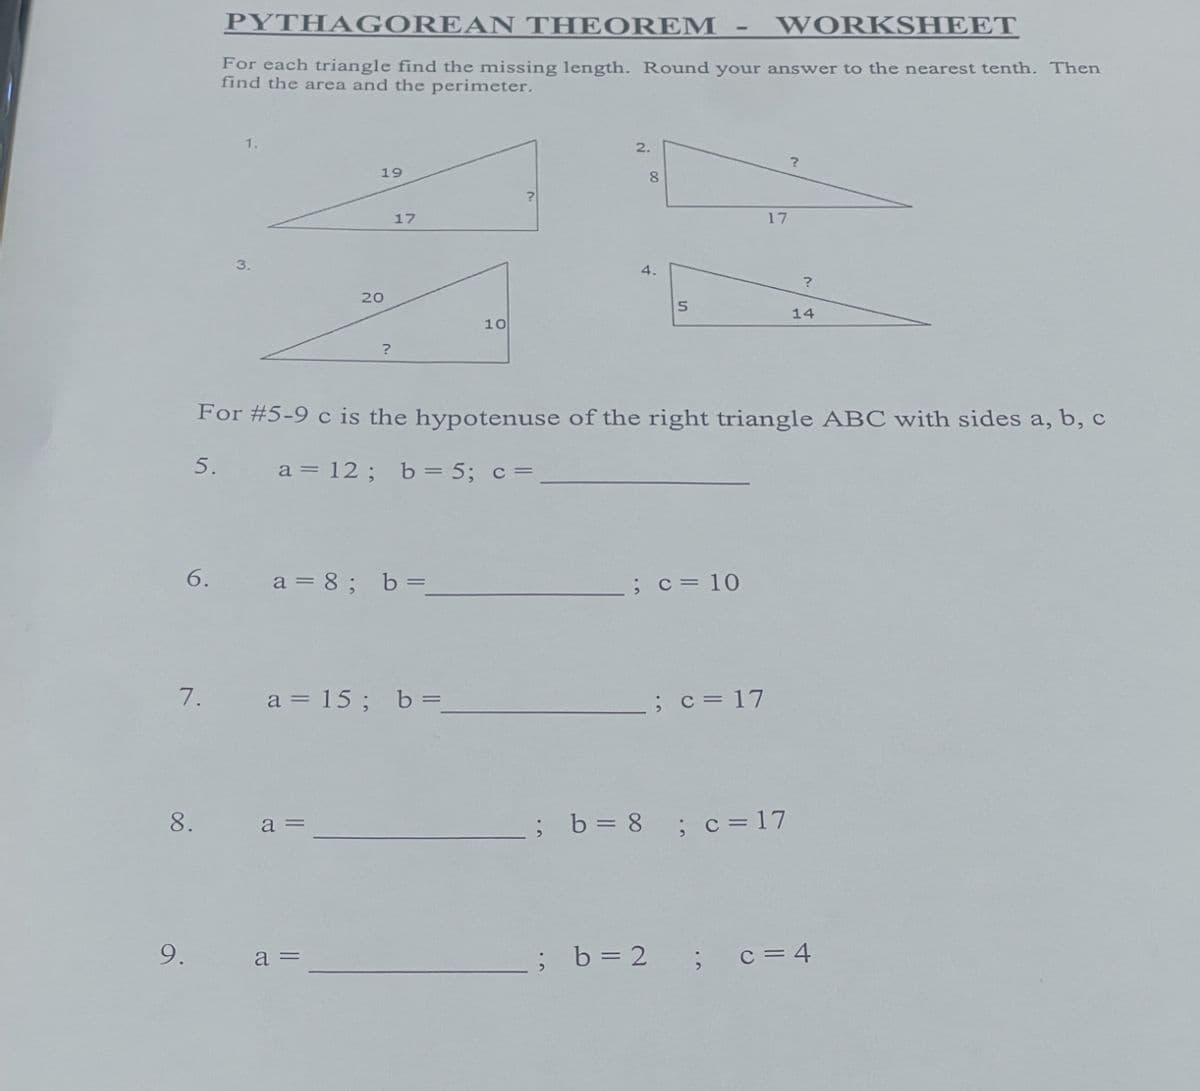 6.
7.
9.
8.
PYTHAGOREAN THEOREM
WORKSHEET
For each triangle find the missing length. Round your answer to the nearest tenth. Then
find the area and the perimeter.
3.
19
20
a =
?
a =
17
a = 8; b=
a = 15; b=_
10
2.
For #5-9 c is the hypotenuse of the right triangle ABC with sides a, b, c
5.
a = 12; b = 5; c =
8
5
; c = 10
; b = 2
17
; c = 17
; b = 8 ; c=17
?
?
14
; c = 4